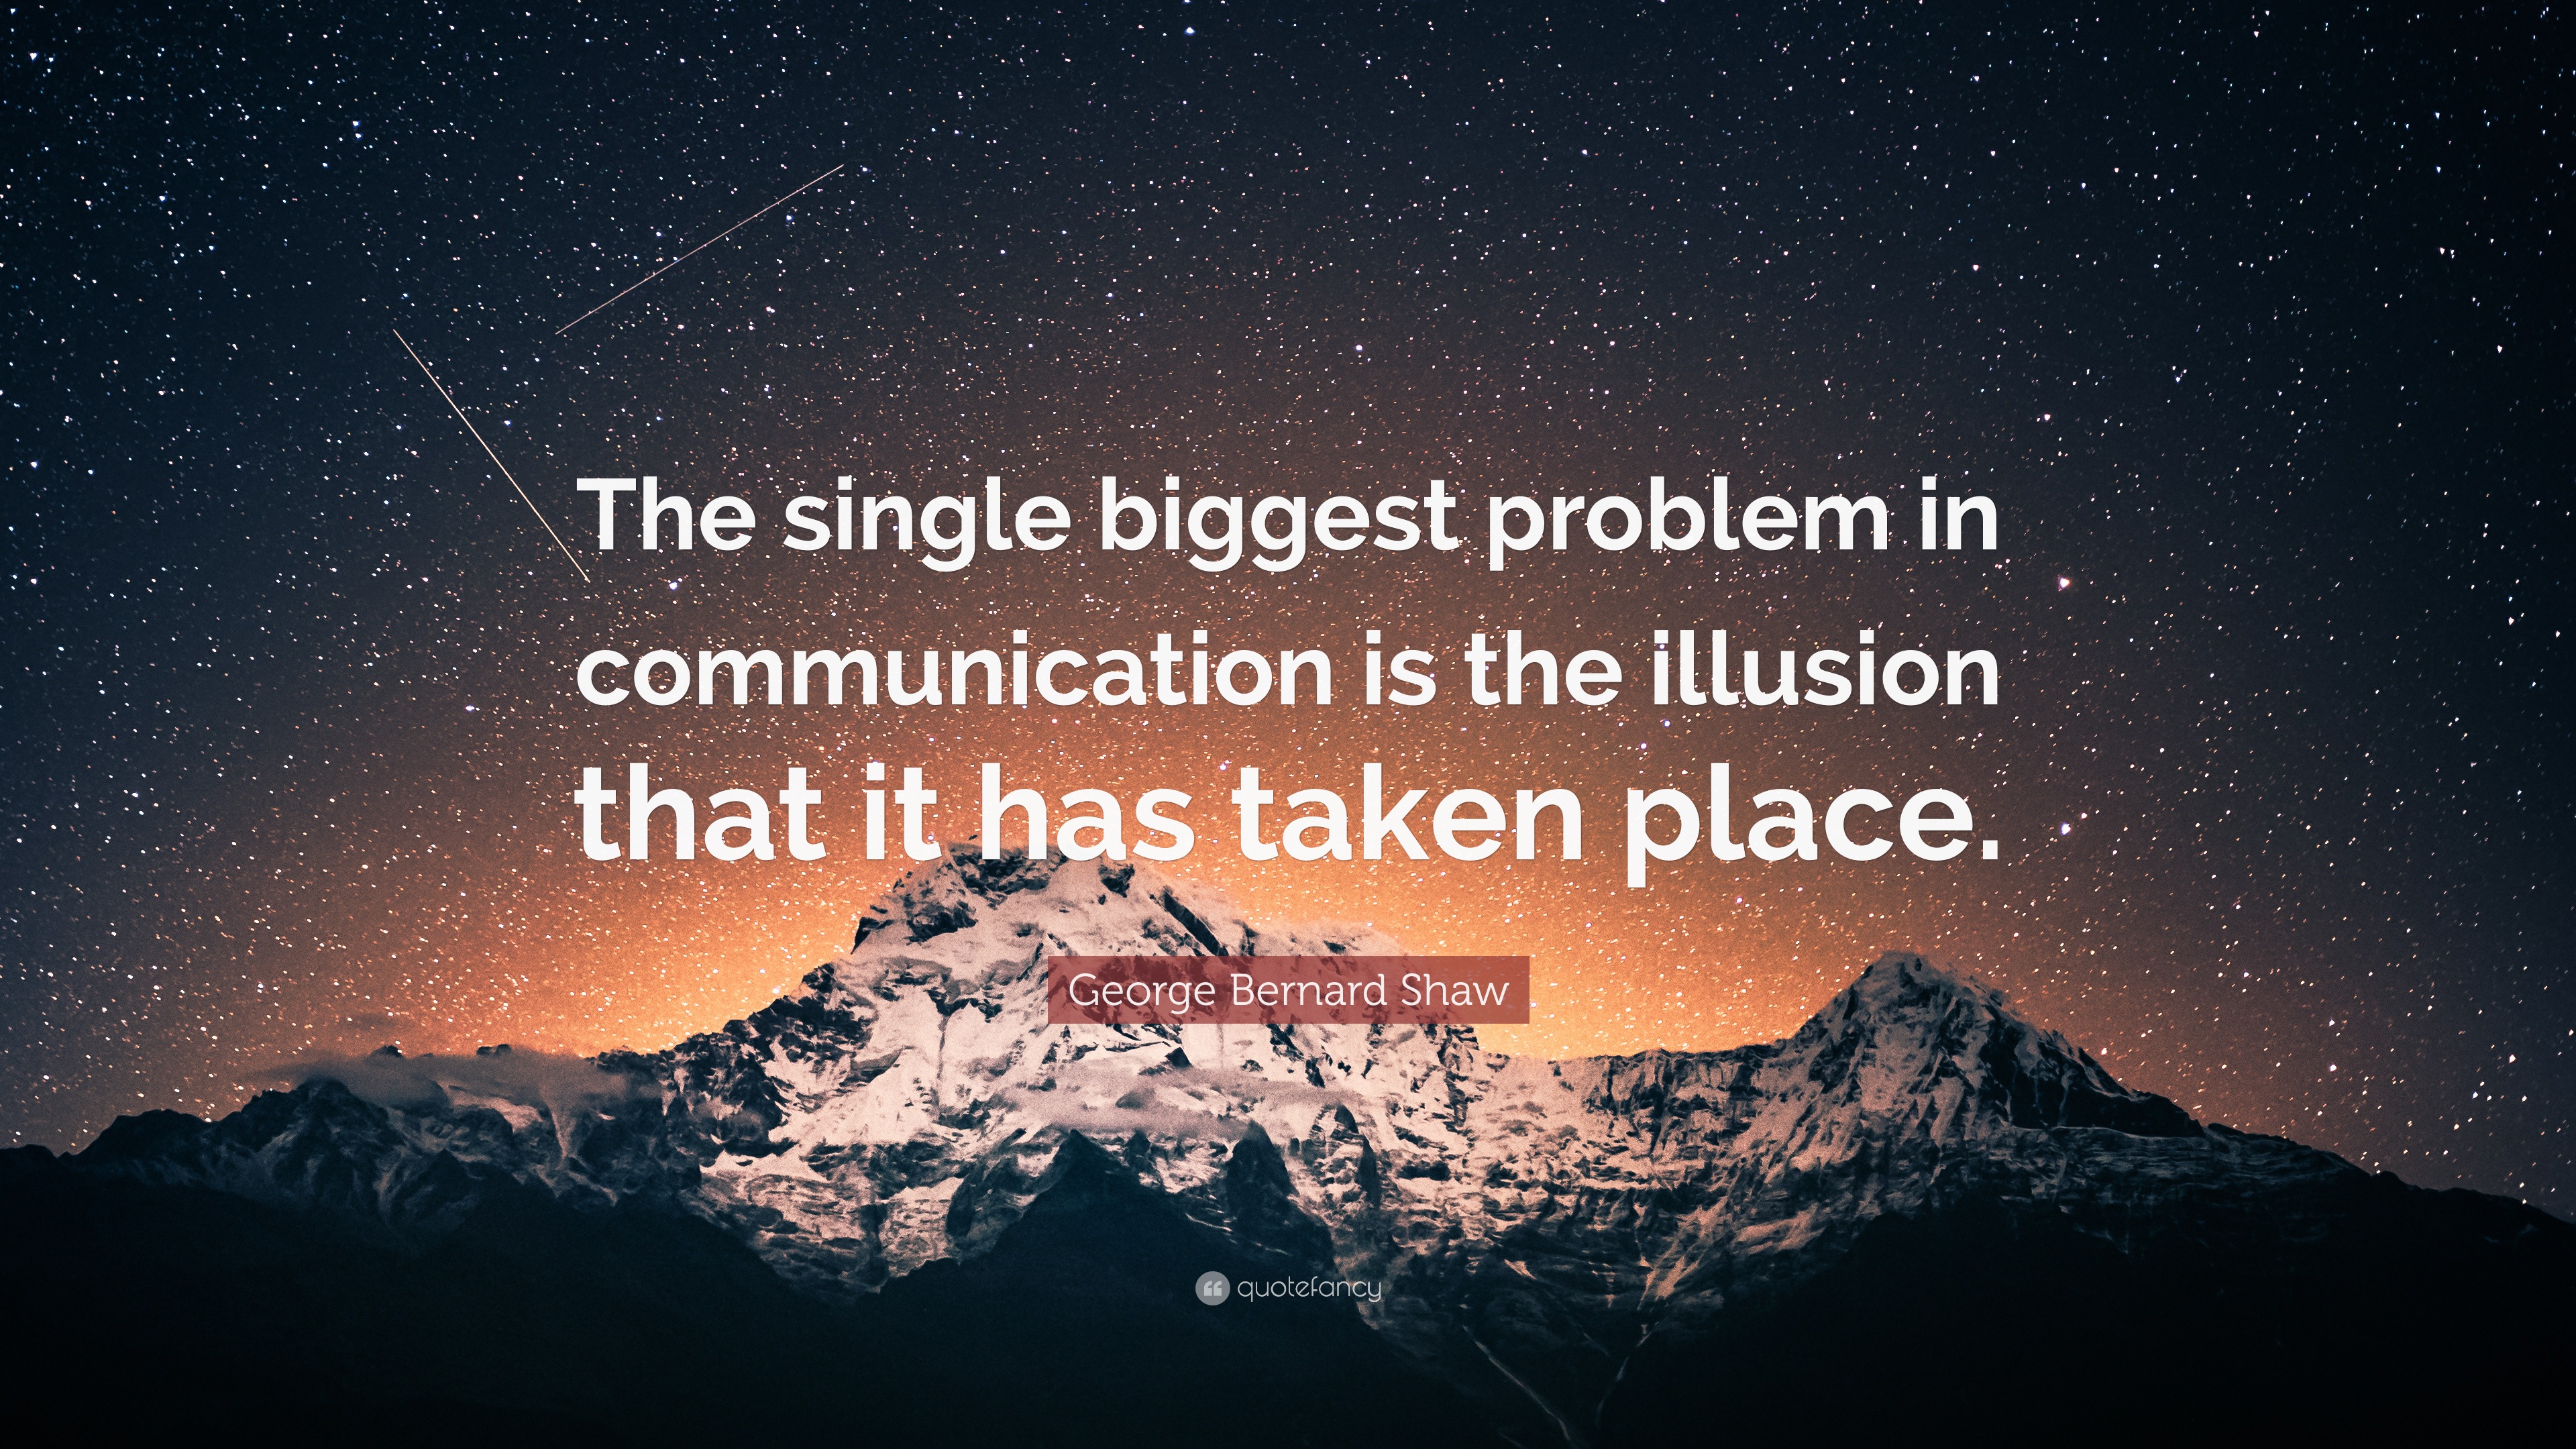 the single biggest problem in communication is the illusion that it has taken place source